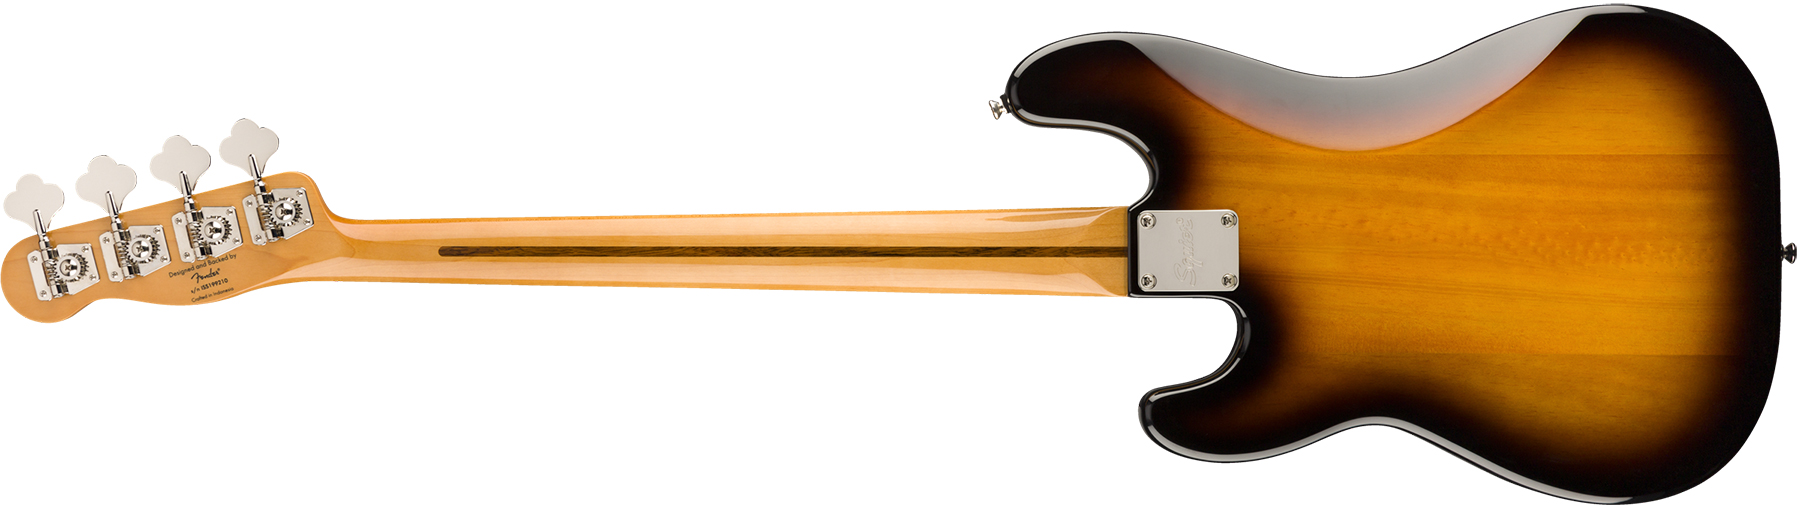 Squier Precision Bass '50s Classic Vibe 2019 Mn - 2-color Sunburst - Solid body electric bass - Variation 1